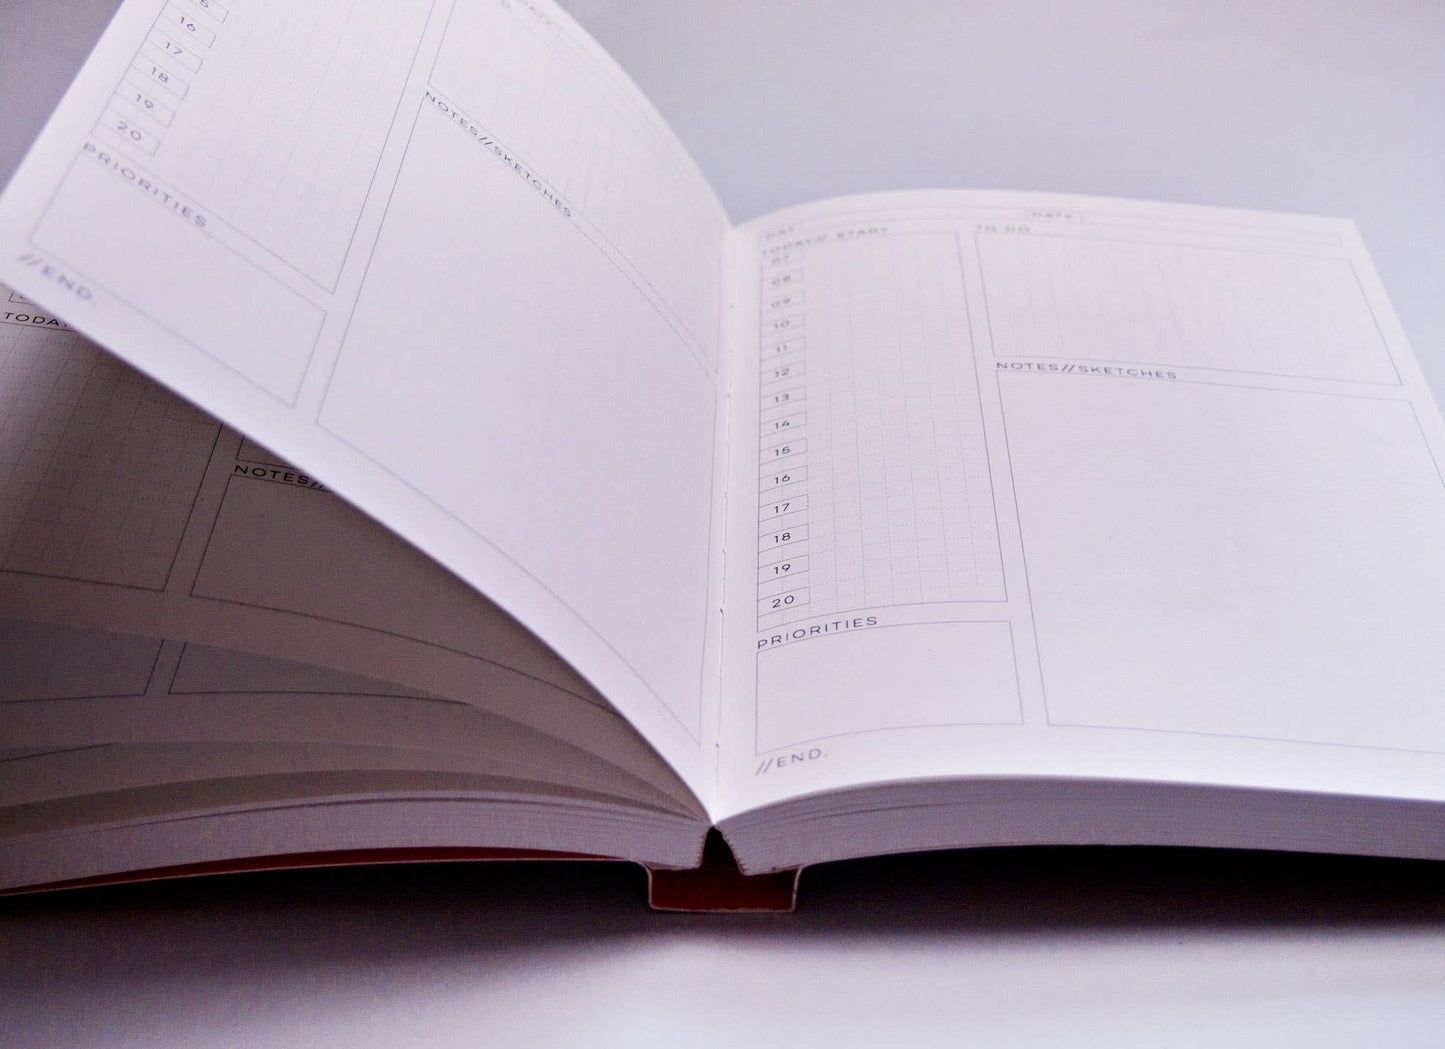 The Completist Overlay Shapes No. 1 Daily Planner Book